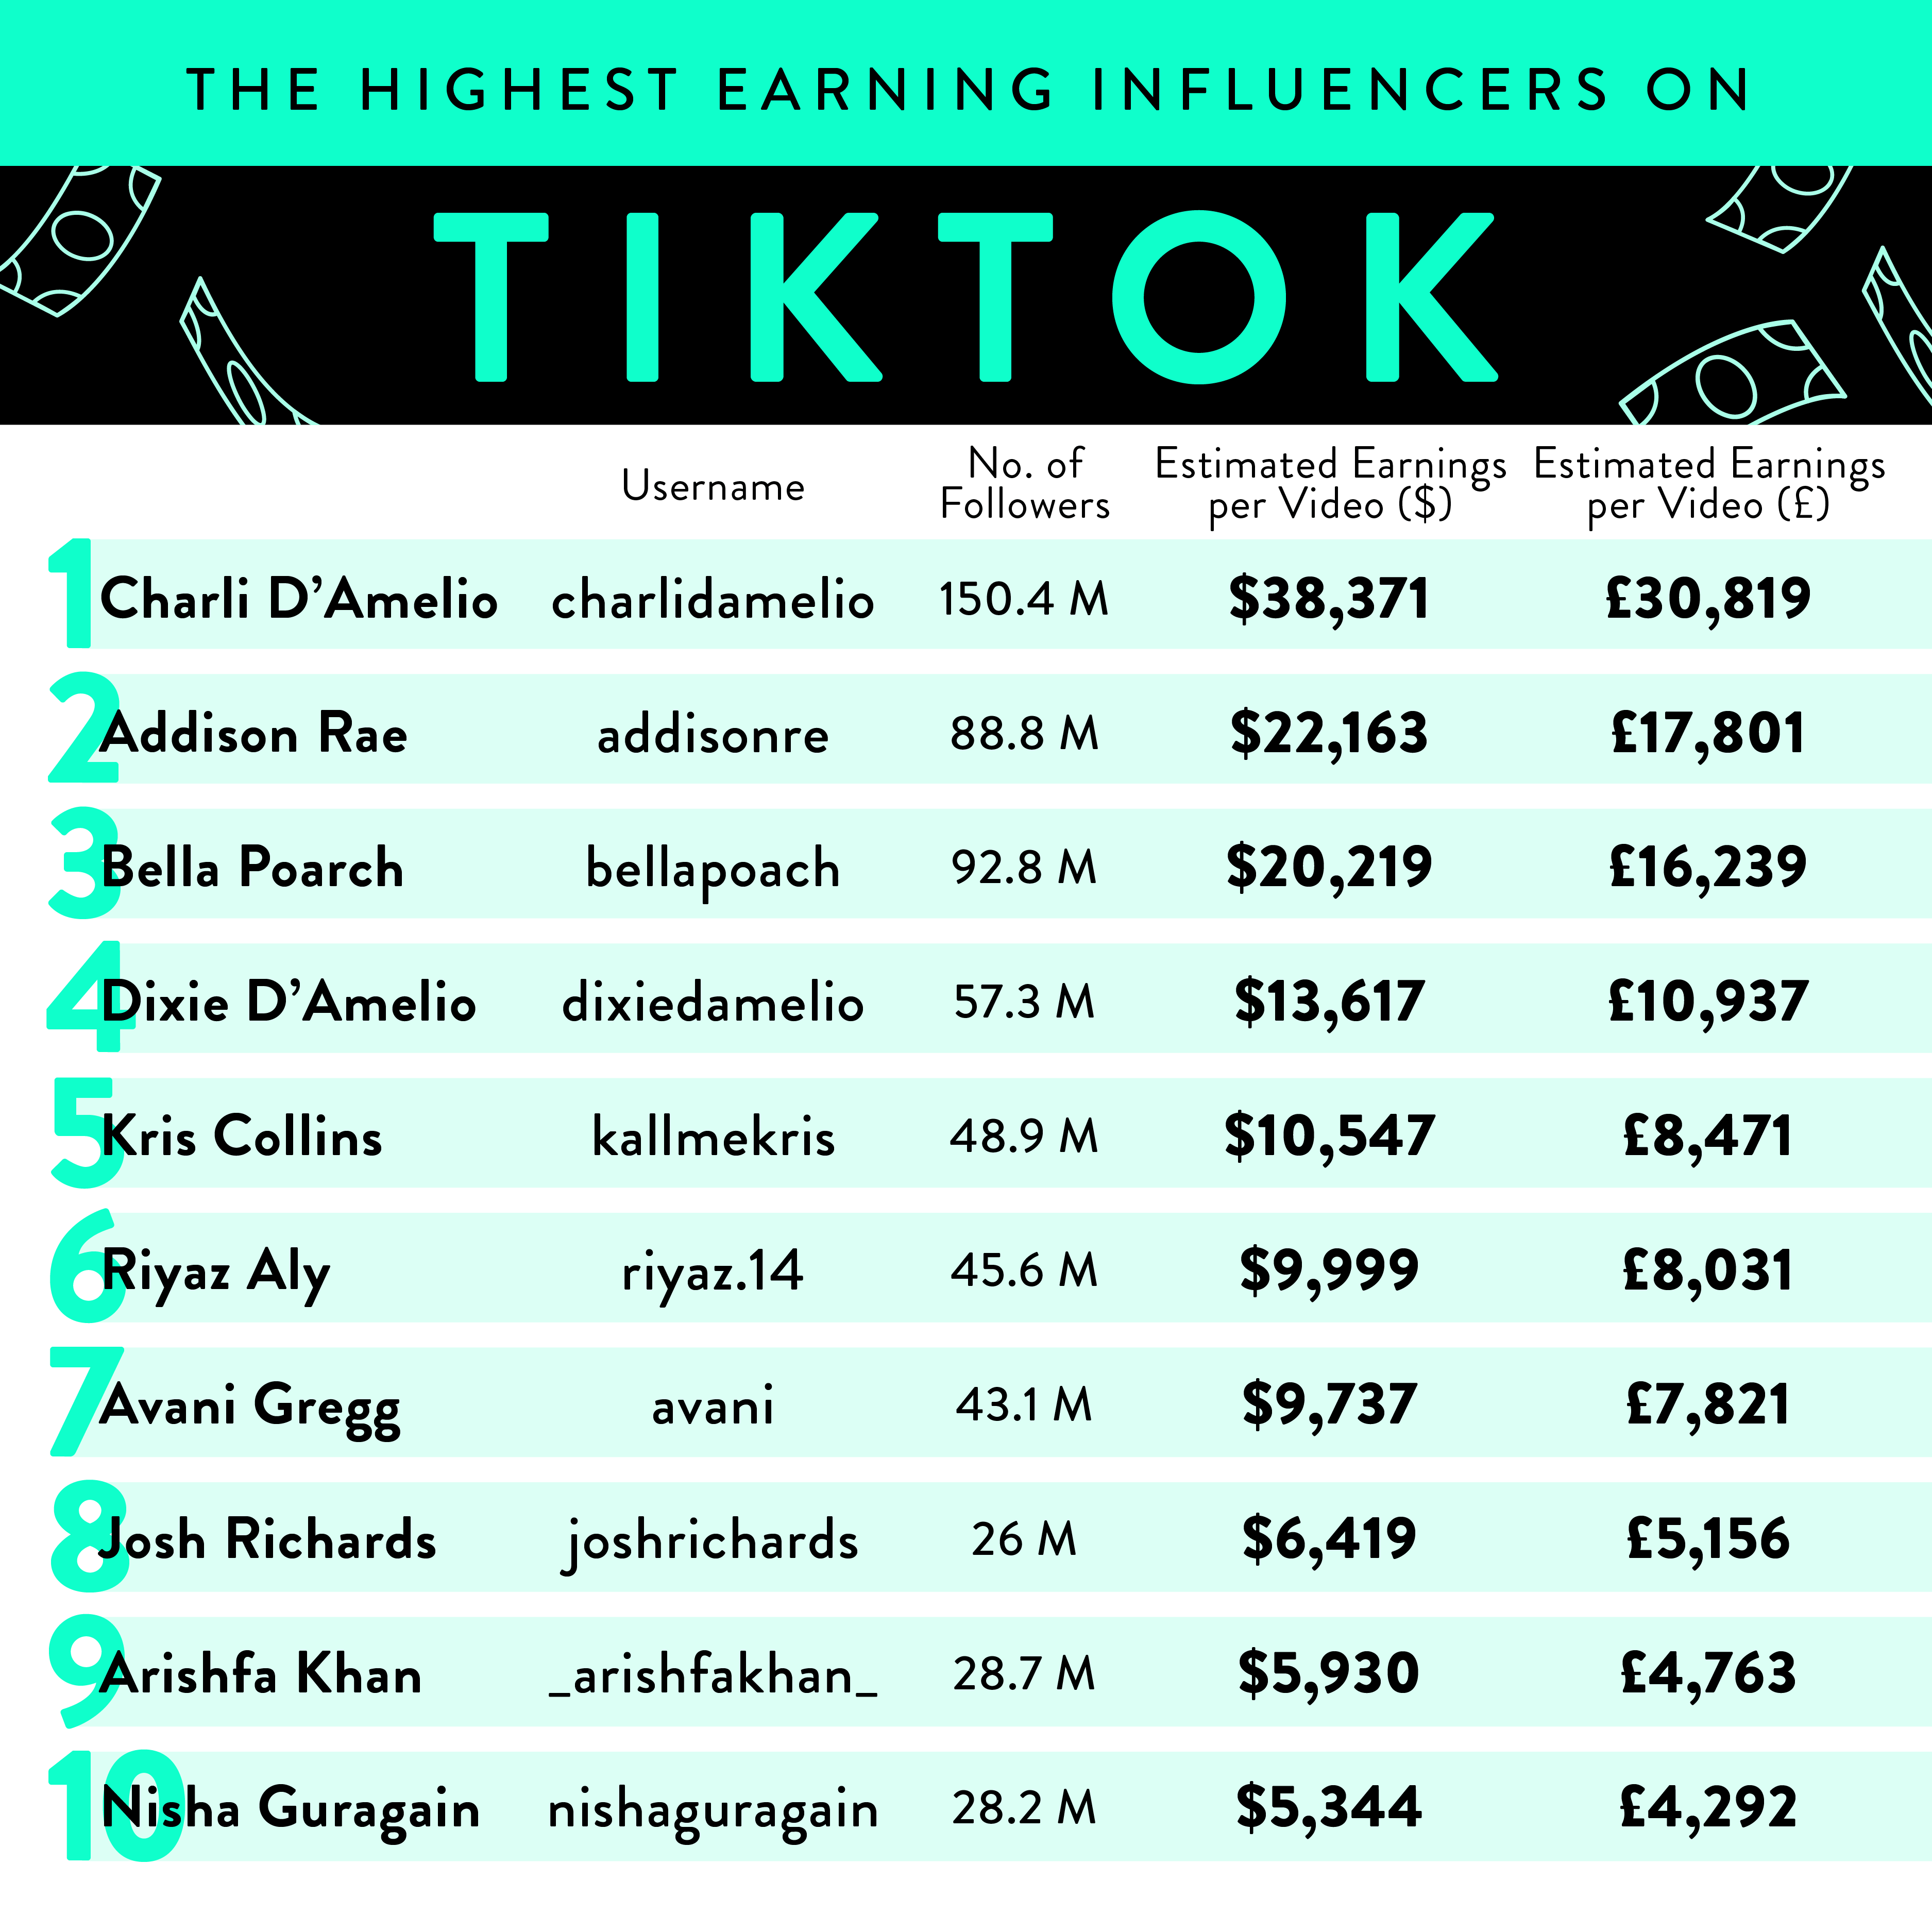 Table of highest earning users on Tik Tok